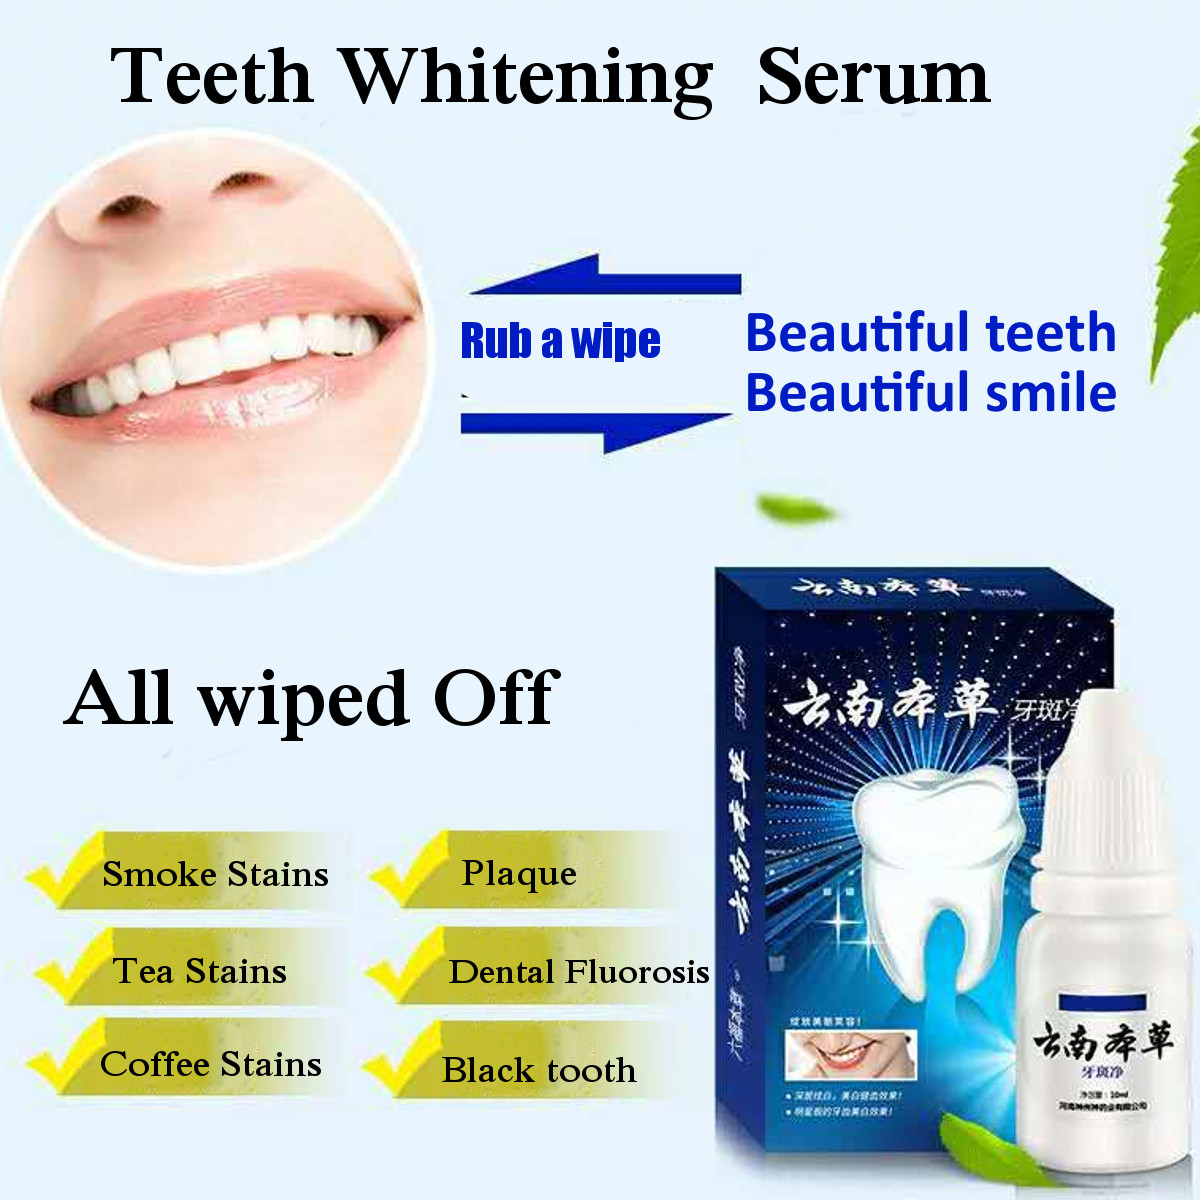 Herb-Teeth-Whitening-Cleansing-Serum-Essence-Oral-Hygiene-Effectively-Removes-Tartars-Plaque-Stains--1815887-5